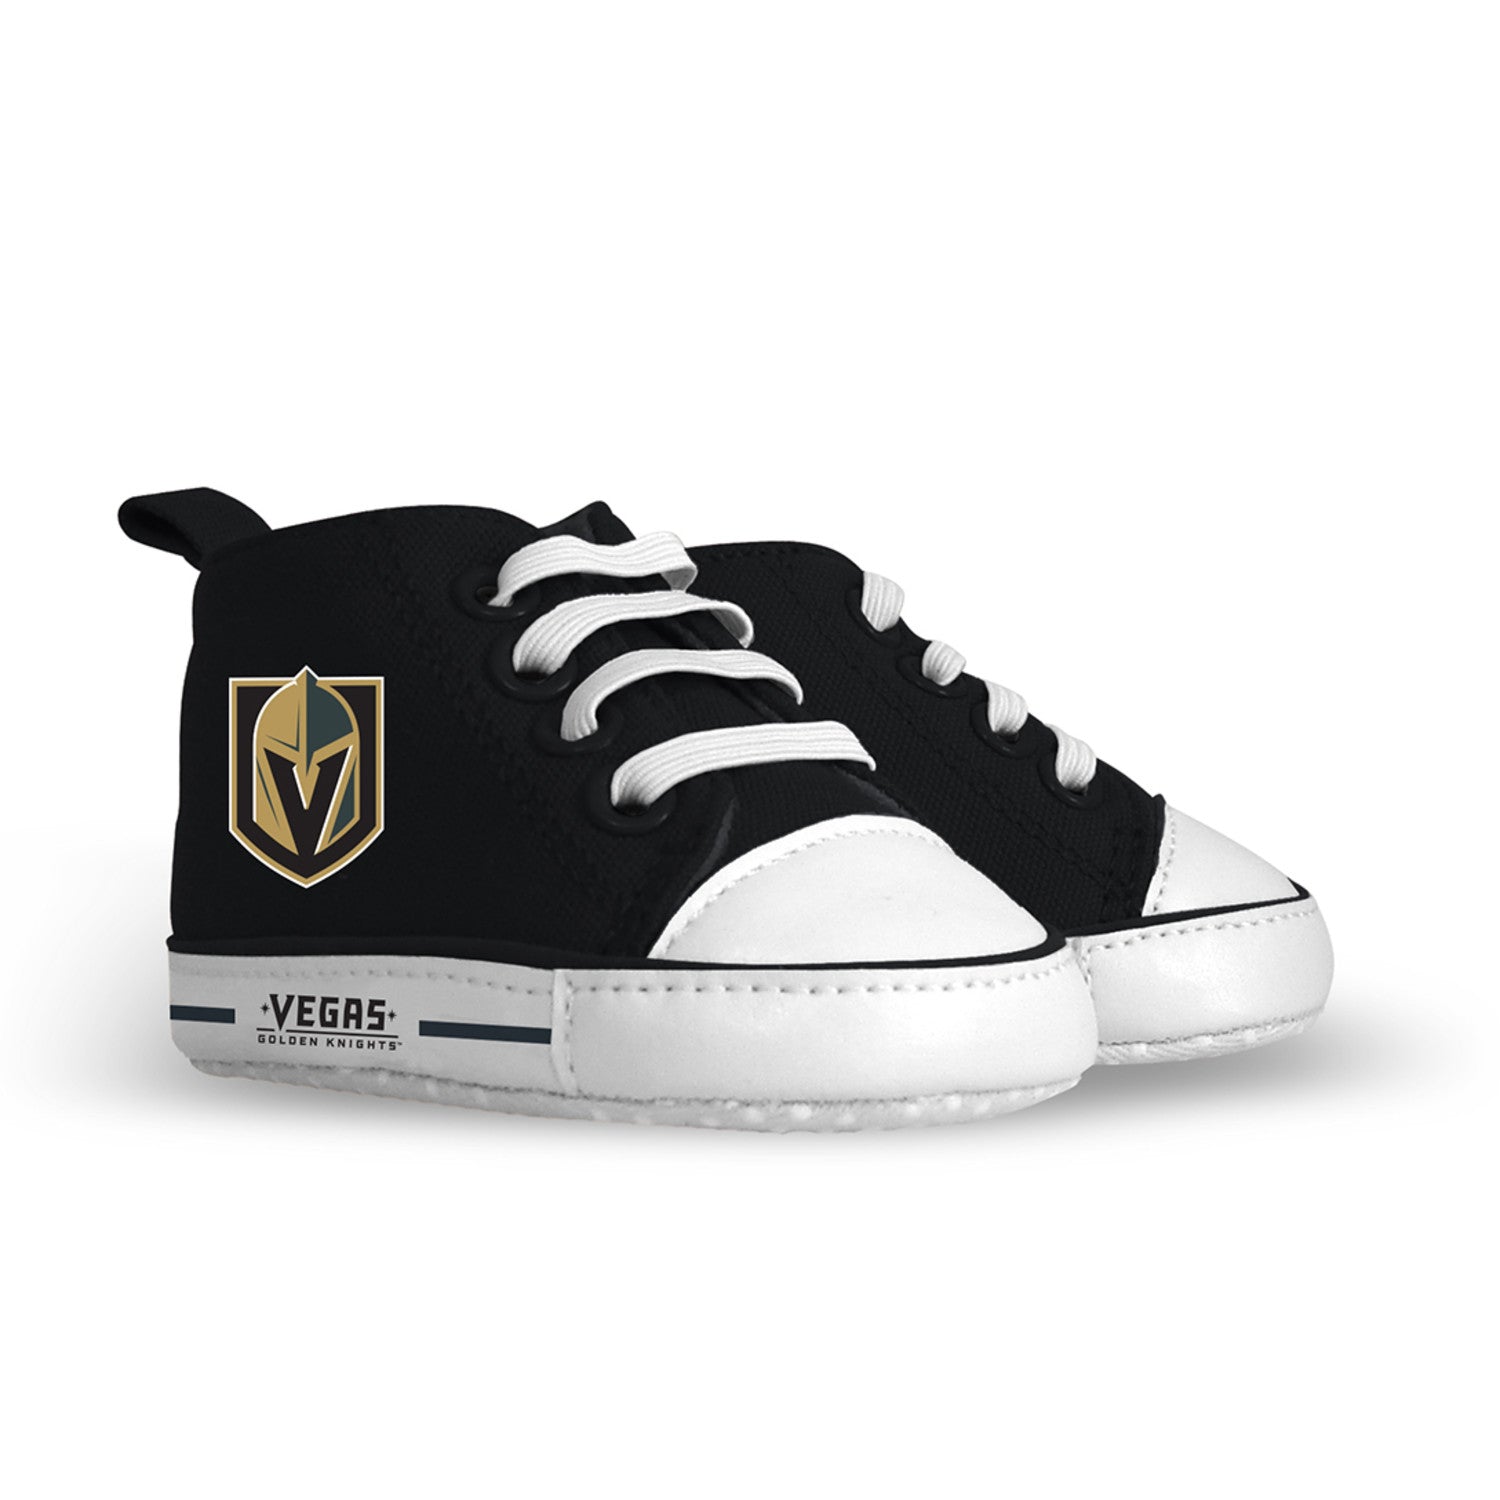 Las Vegas Golden Knights Baby Shoes